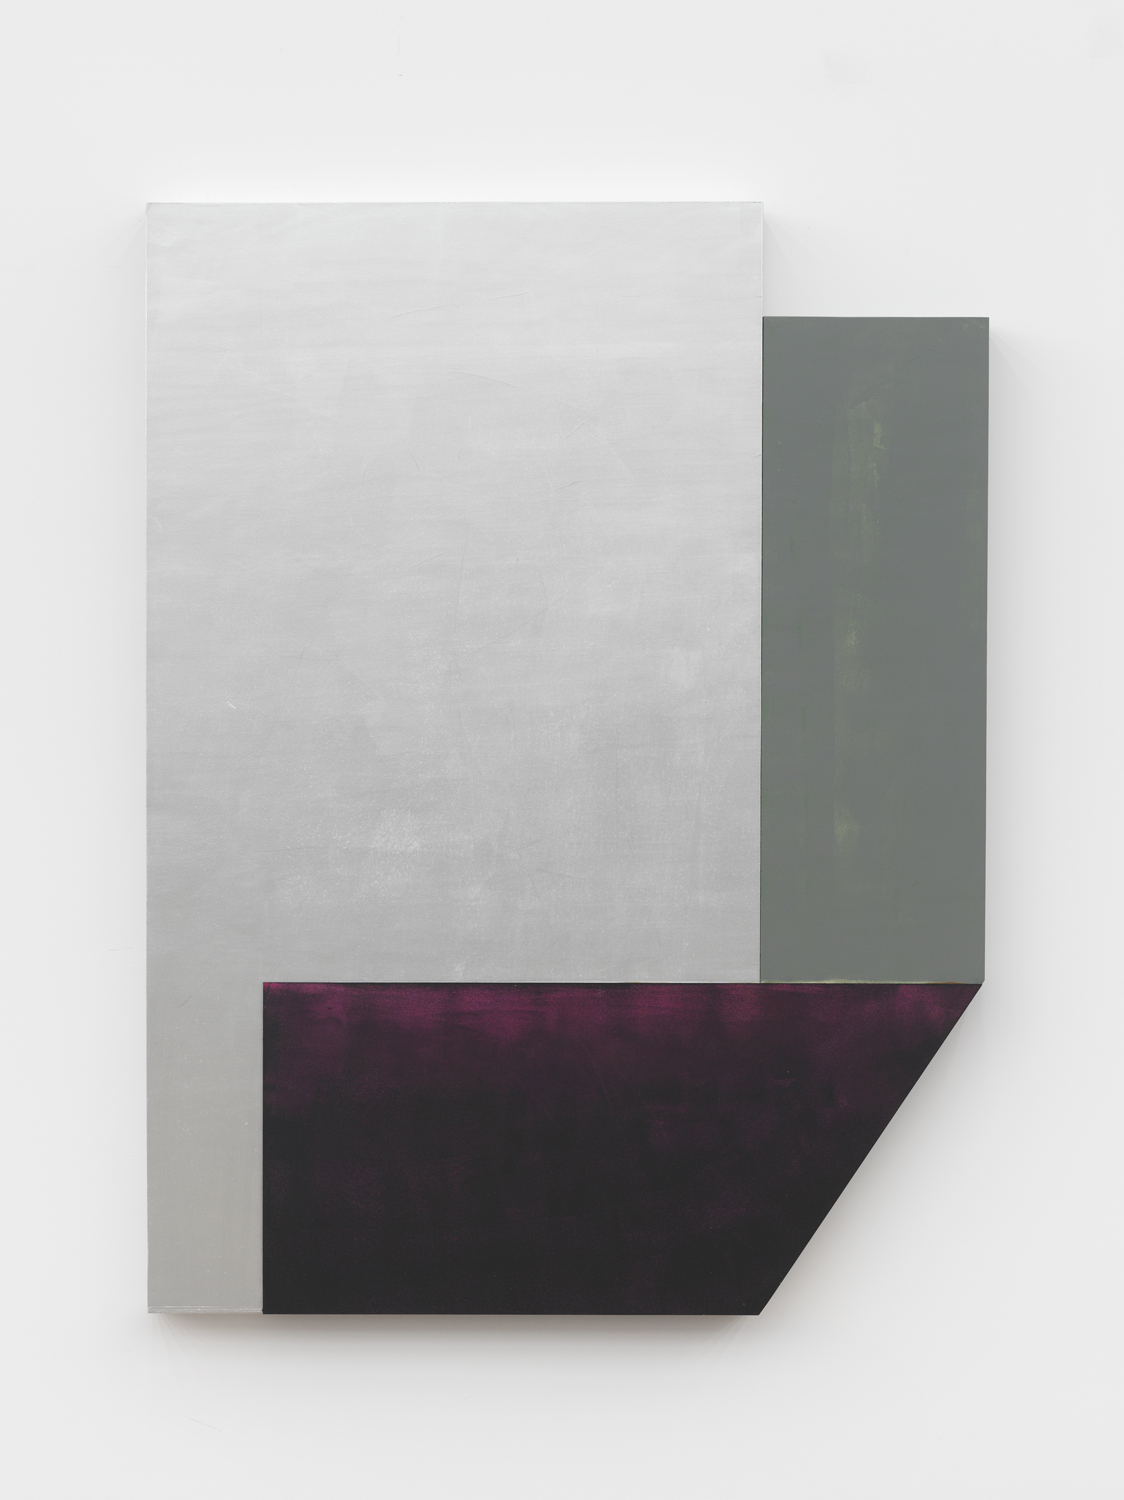 Don Dudley, #141, 2019, Oil-based aluminum enamel and acrylic on birch plywood, 53 3/8 x 40 1/2 x 2 1/2 in.